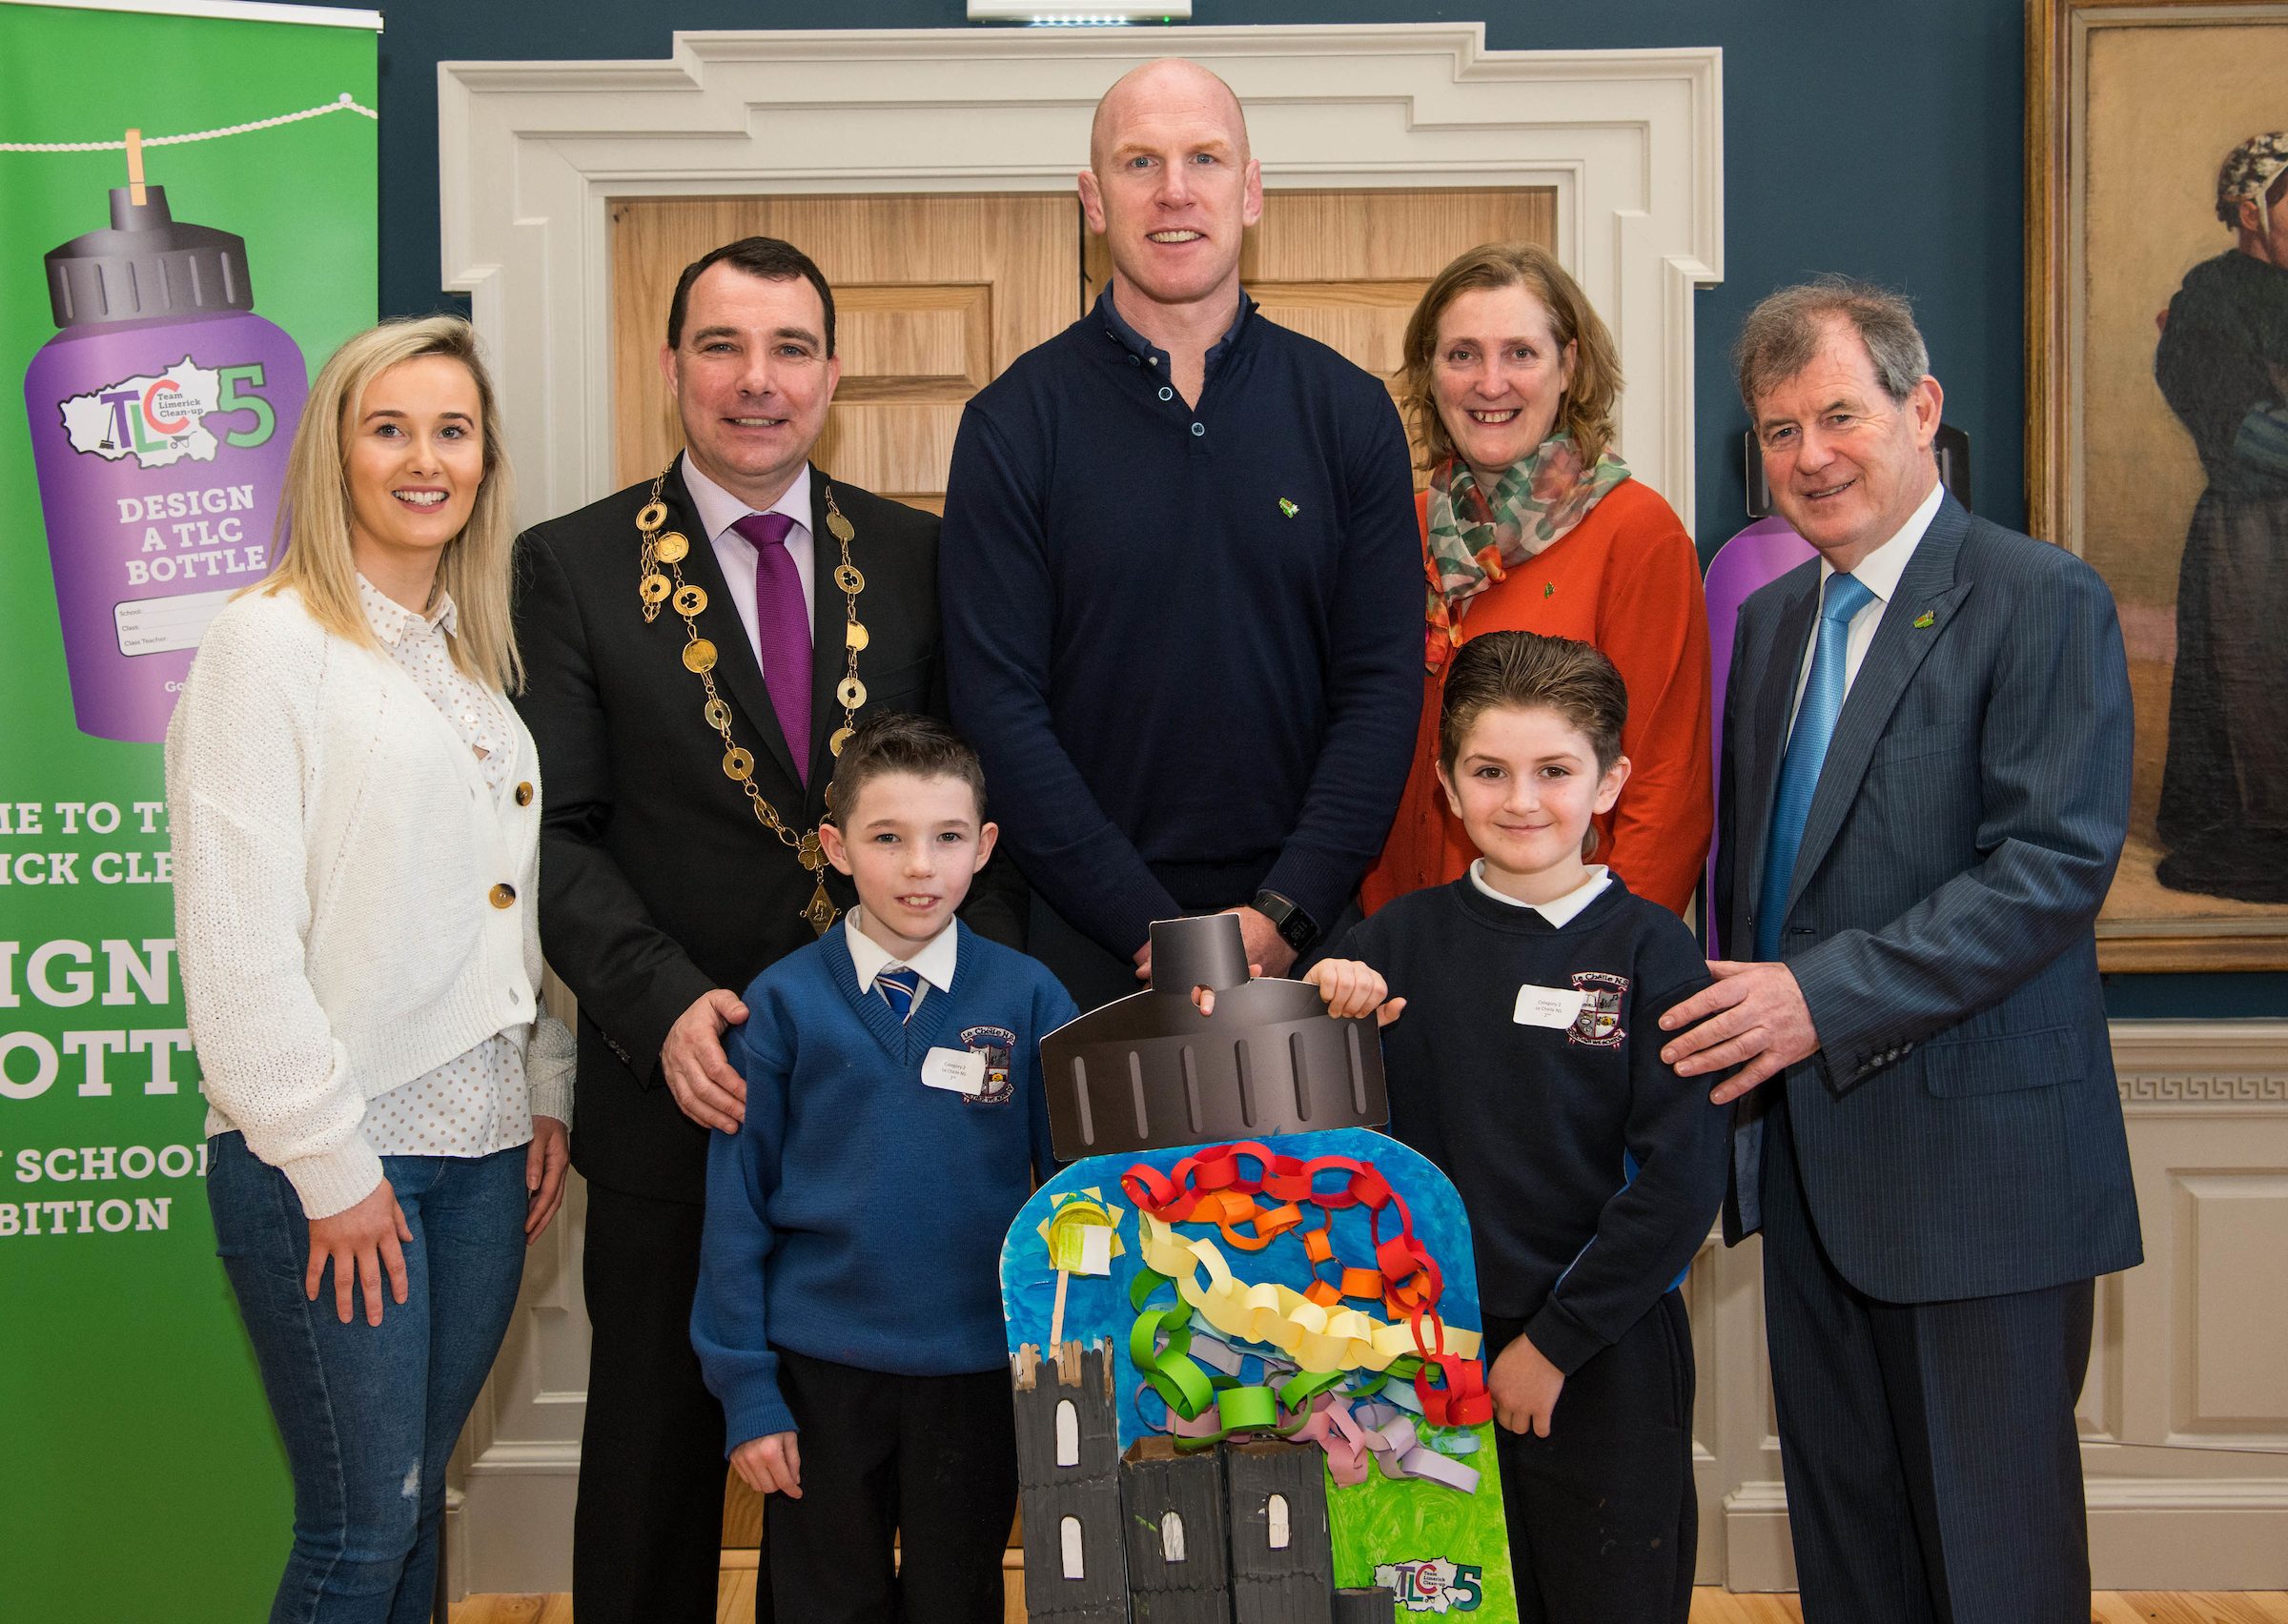 07/03/20192nd place winners of the 3rd and 4th class category are students Travis Wong McNamara, left, and Anthony Casey, from Le Chéile N.S,Roxboro Road, along with teacher Emily Maher, Mayor of Limerick City and County, Cllr James Collins, Paul O'Connell, Helen O'Riordan and JP McManus at the 'Design a TLC Bottle' prizegiving at the Hunt Museum, Limerick. Over 50 primary schools across the county entered ahead of Team Limerick Clean-Up 5, which will see thousands of volunteers take to the streets of Limerick city and county for Europe's largest one-day clean up. Sponsored by the JP McManus Benevolent Fund, the event has seen over 360 tonnes of litter gathered from the streets since inception in 2015. Over 14,000 volunteers have already signed up for the 2019 event, taking place on Good Friday, 19th April. Photo by Diarmuid Greene